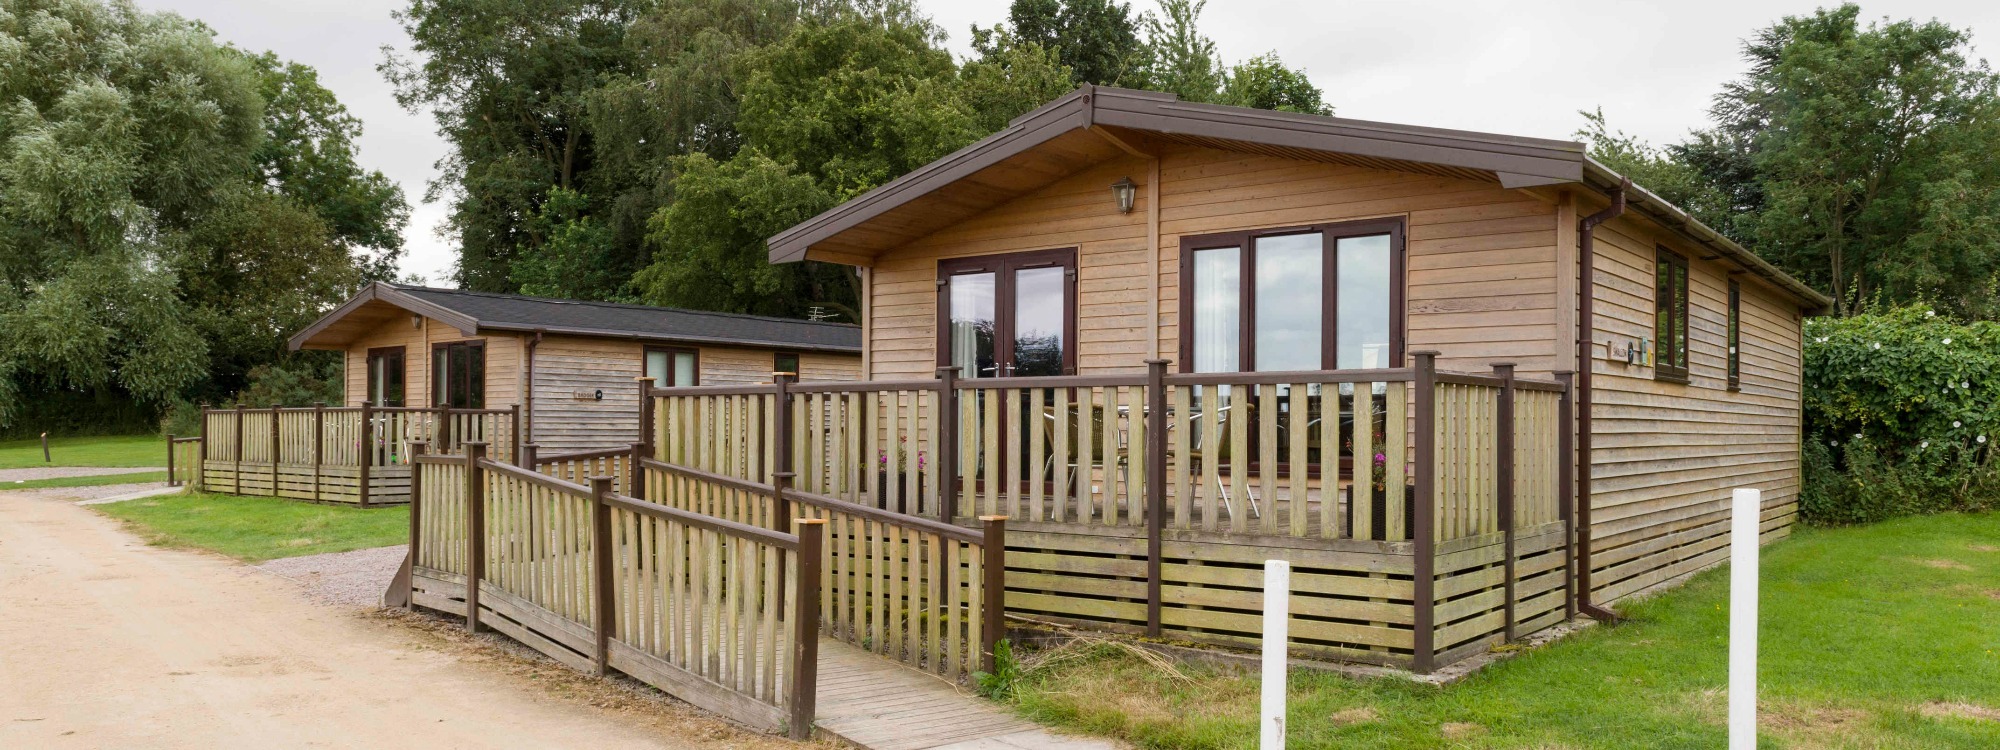 Lodge Country Park*Holiday Accommodation, Camping Facilities, Café + Shop*Enter website